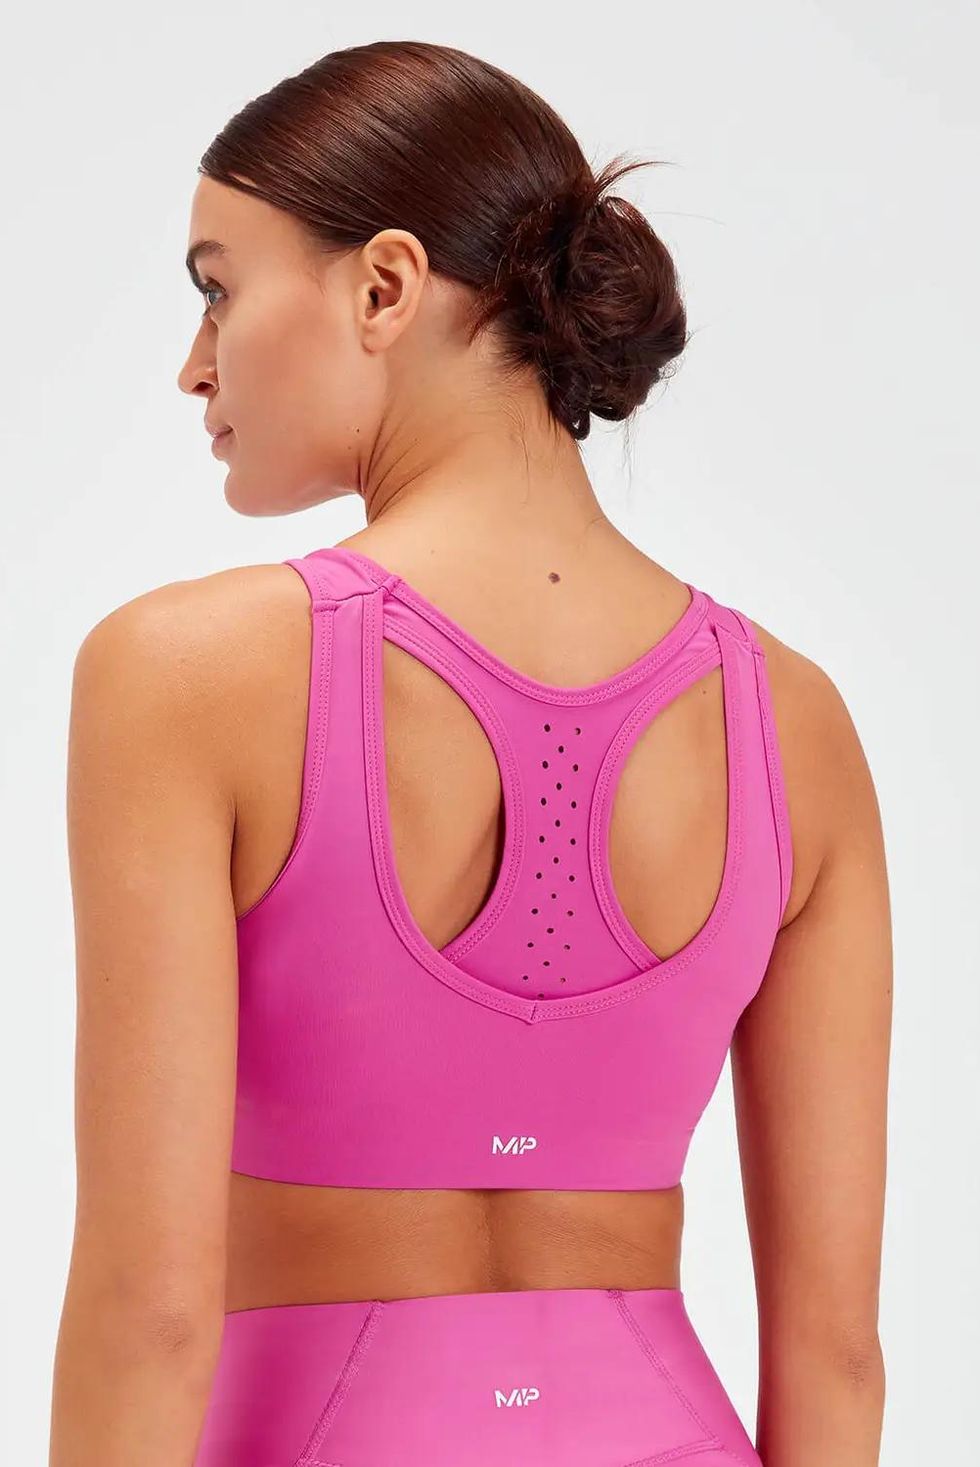 Our Best Gym Tops For Women This Summer - MYPROTEIN™